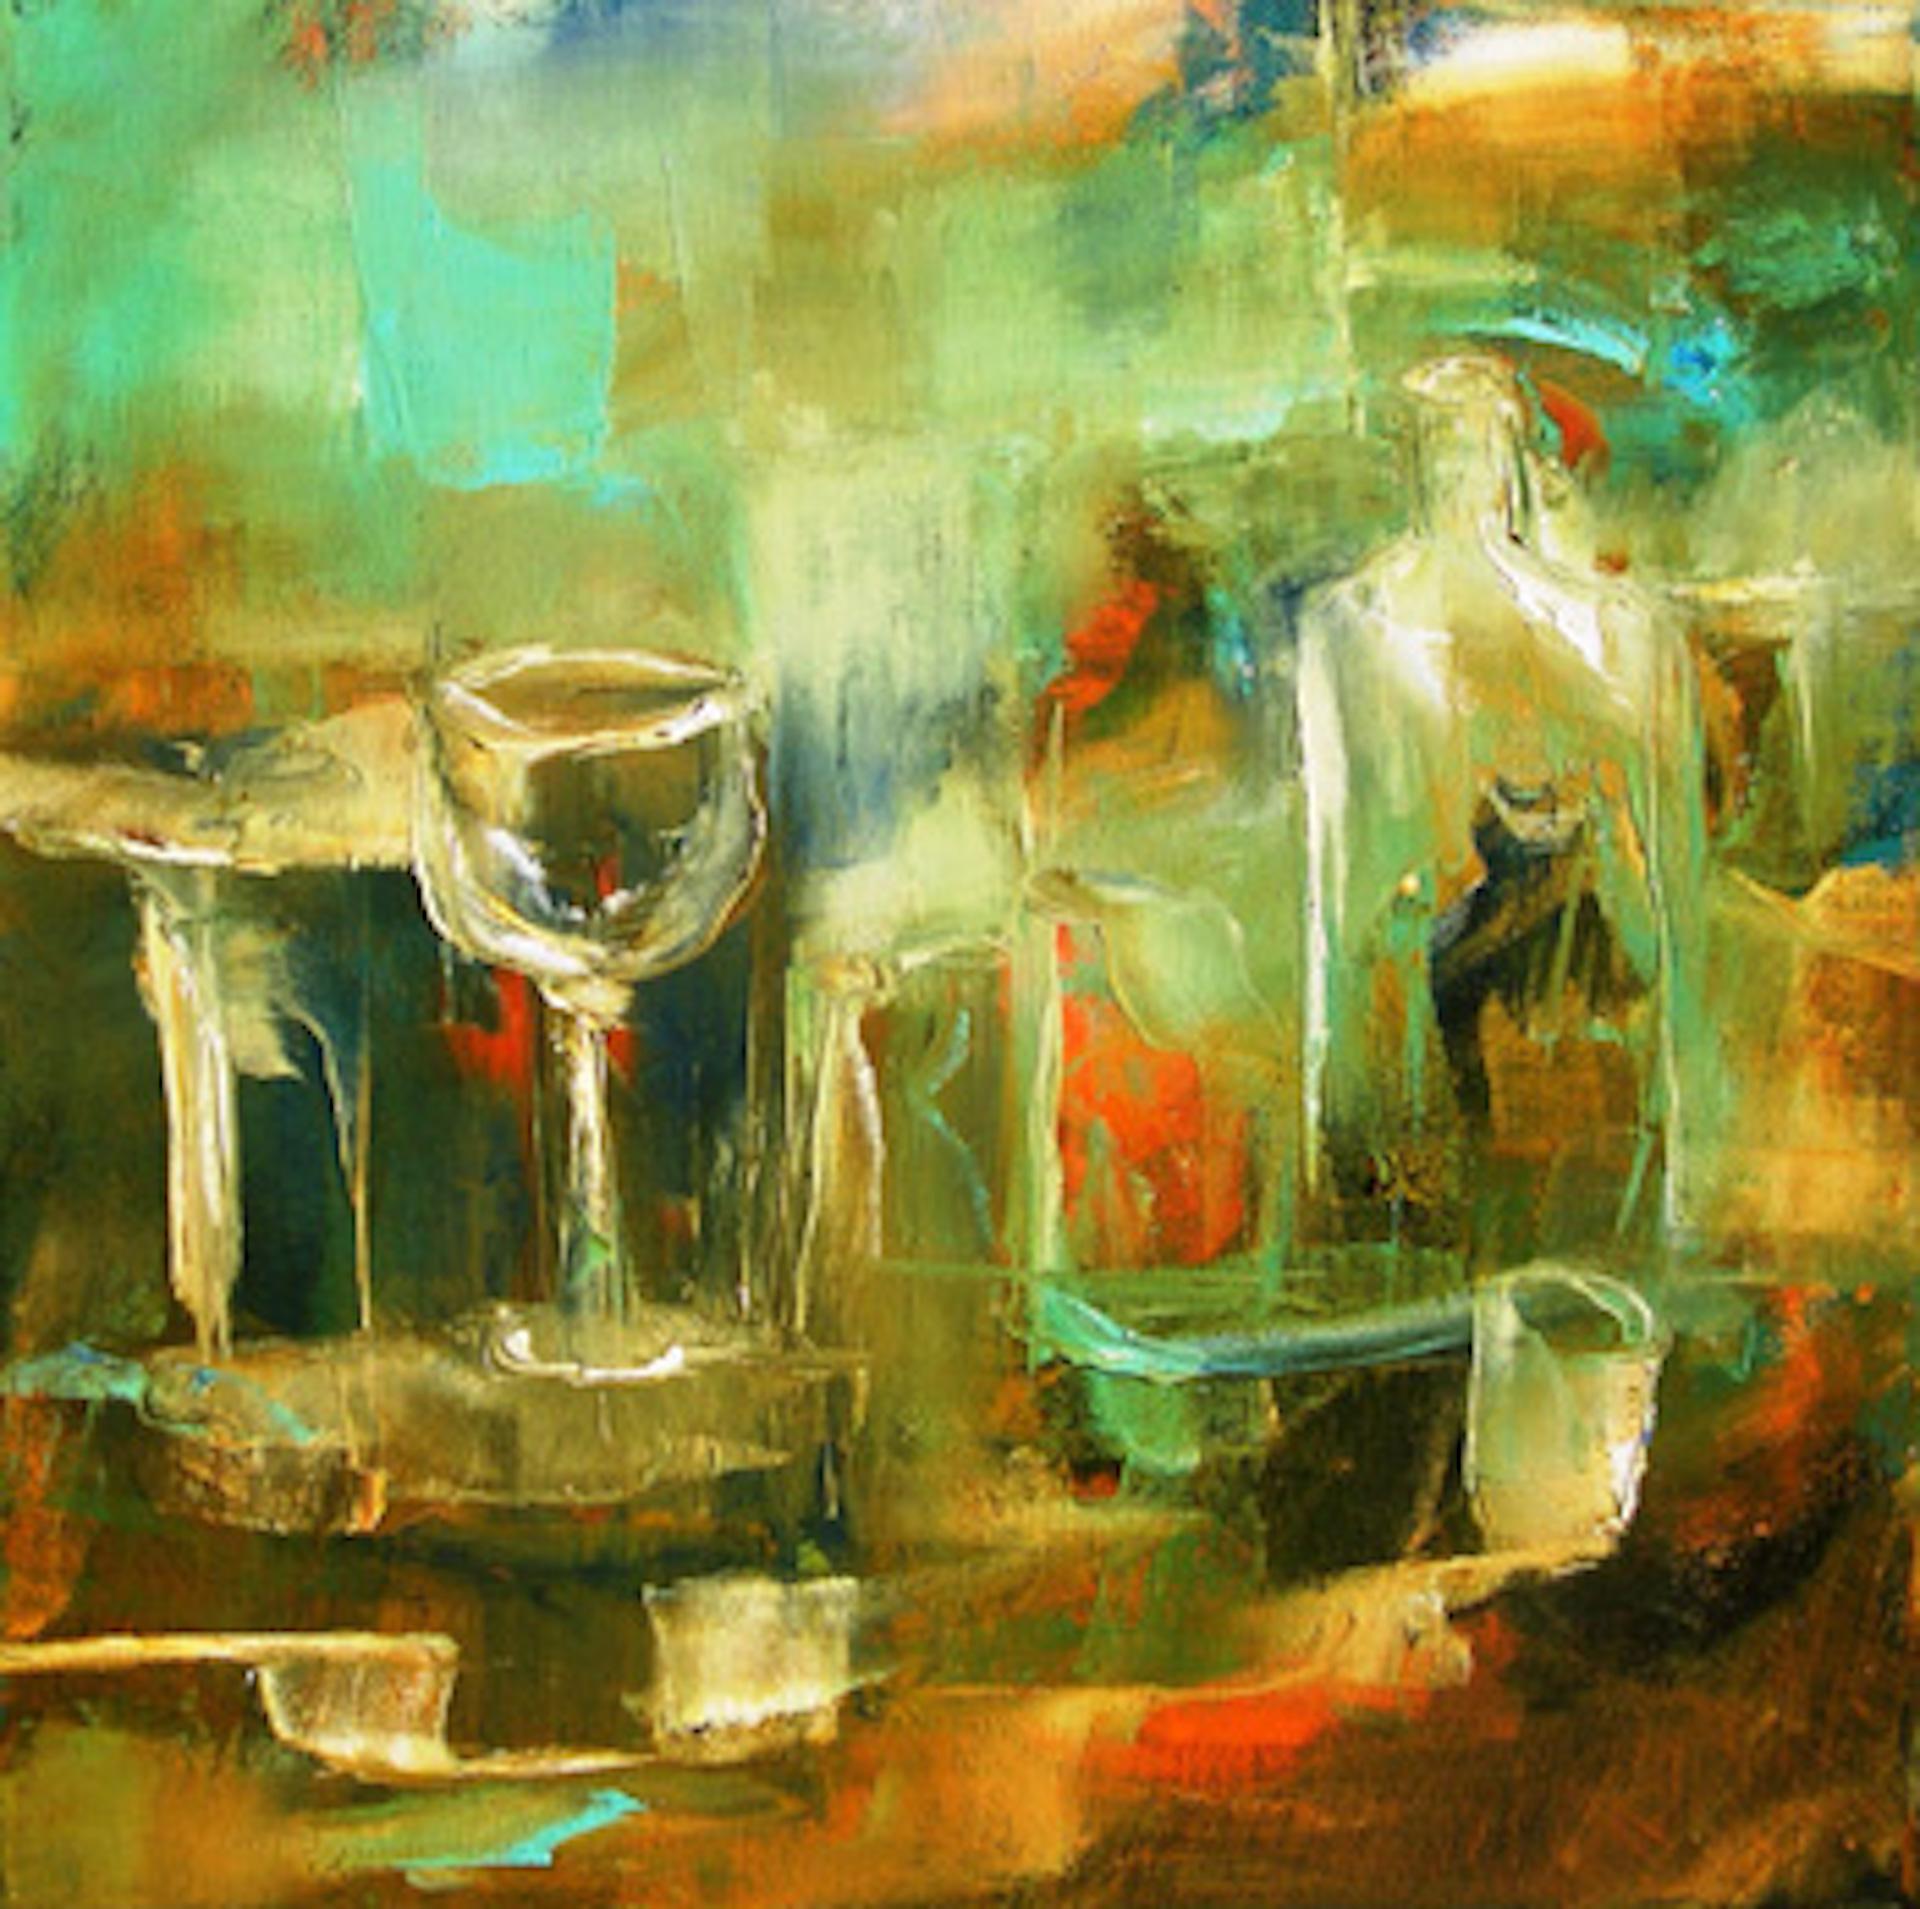 French Contemporary Art by Josette Dubost - Transparences